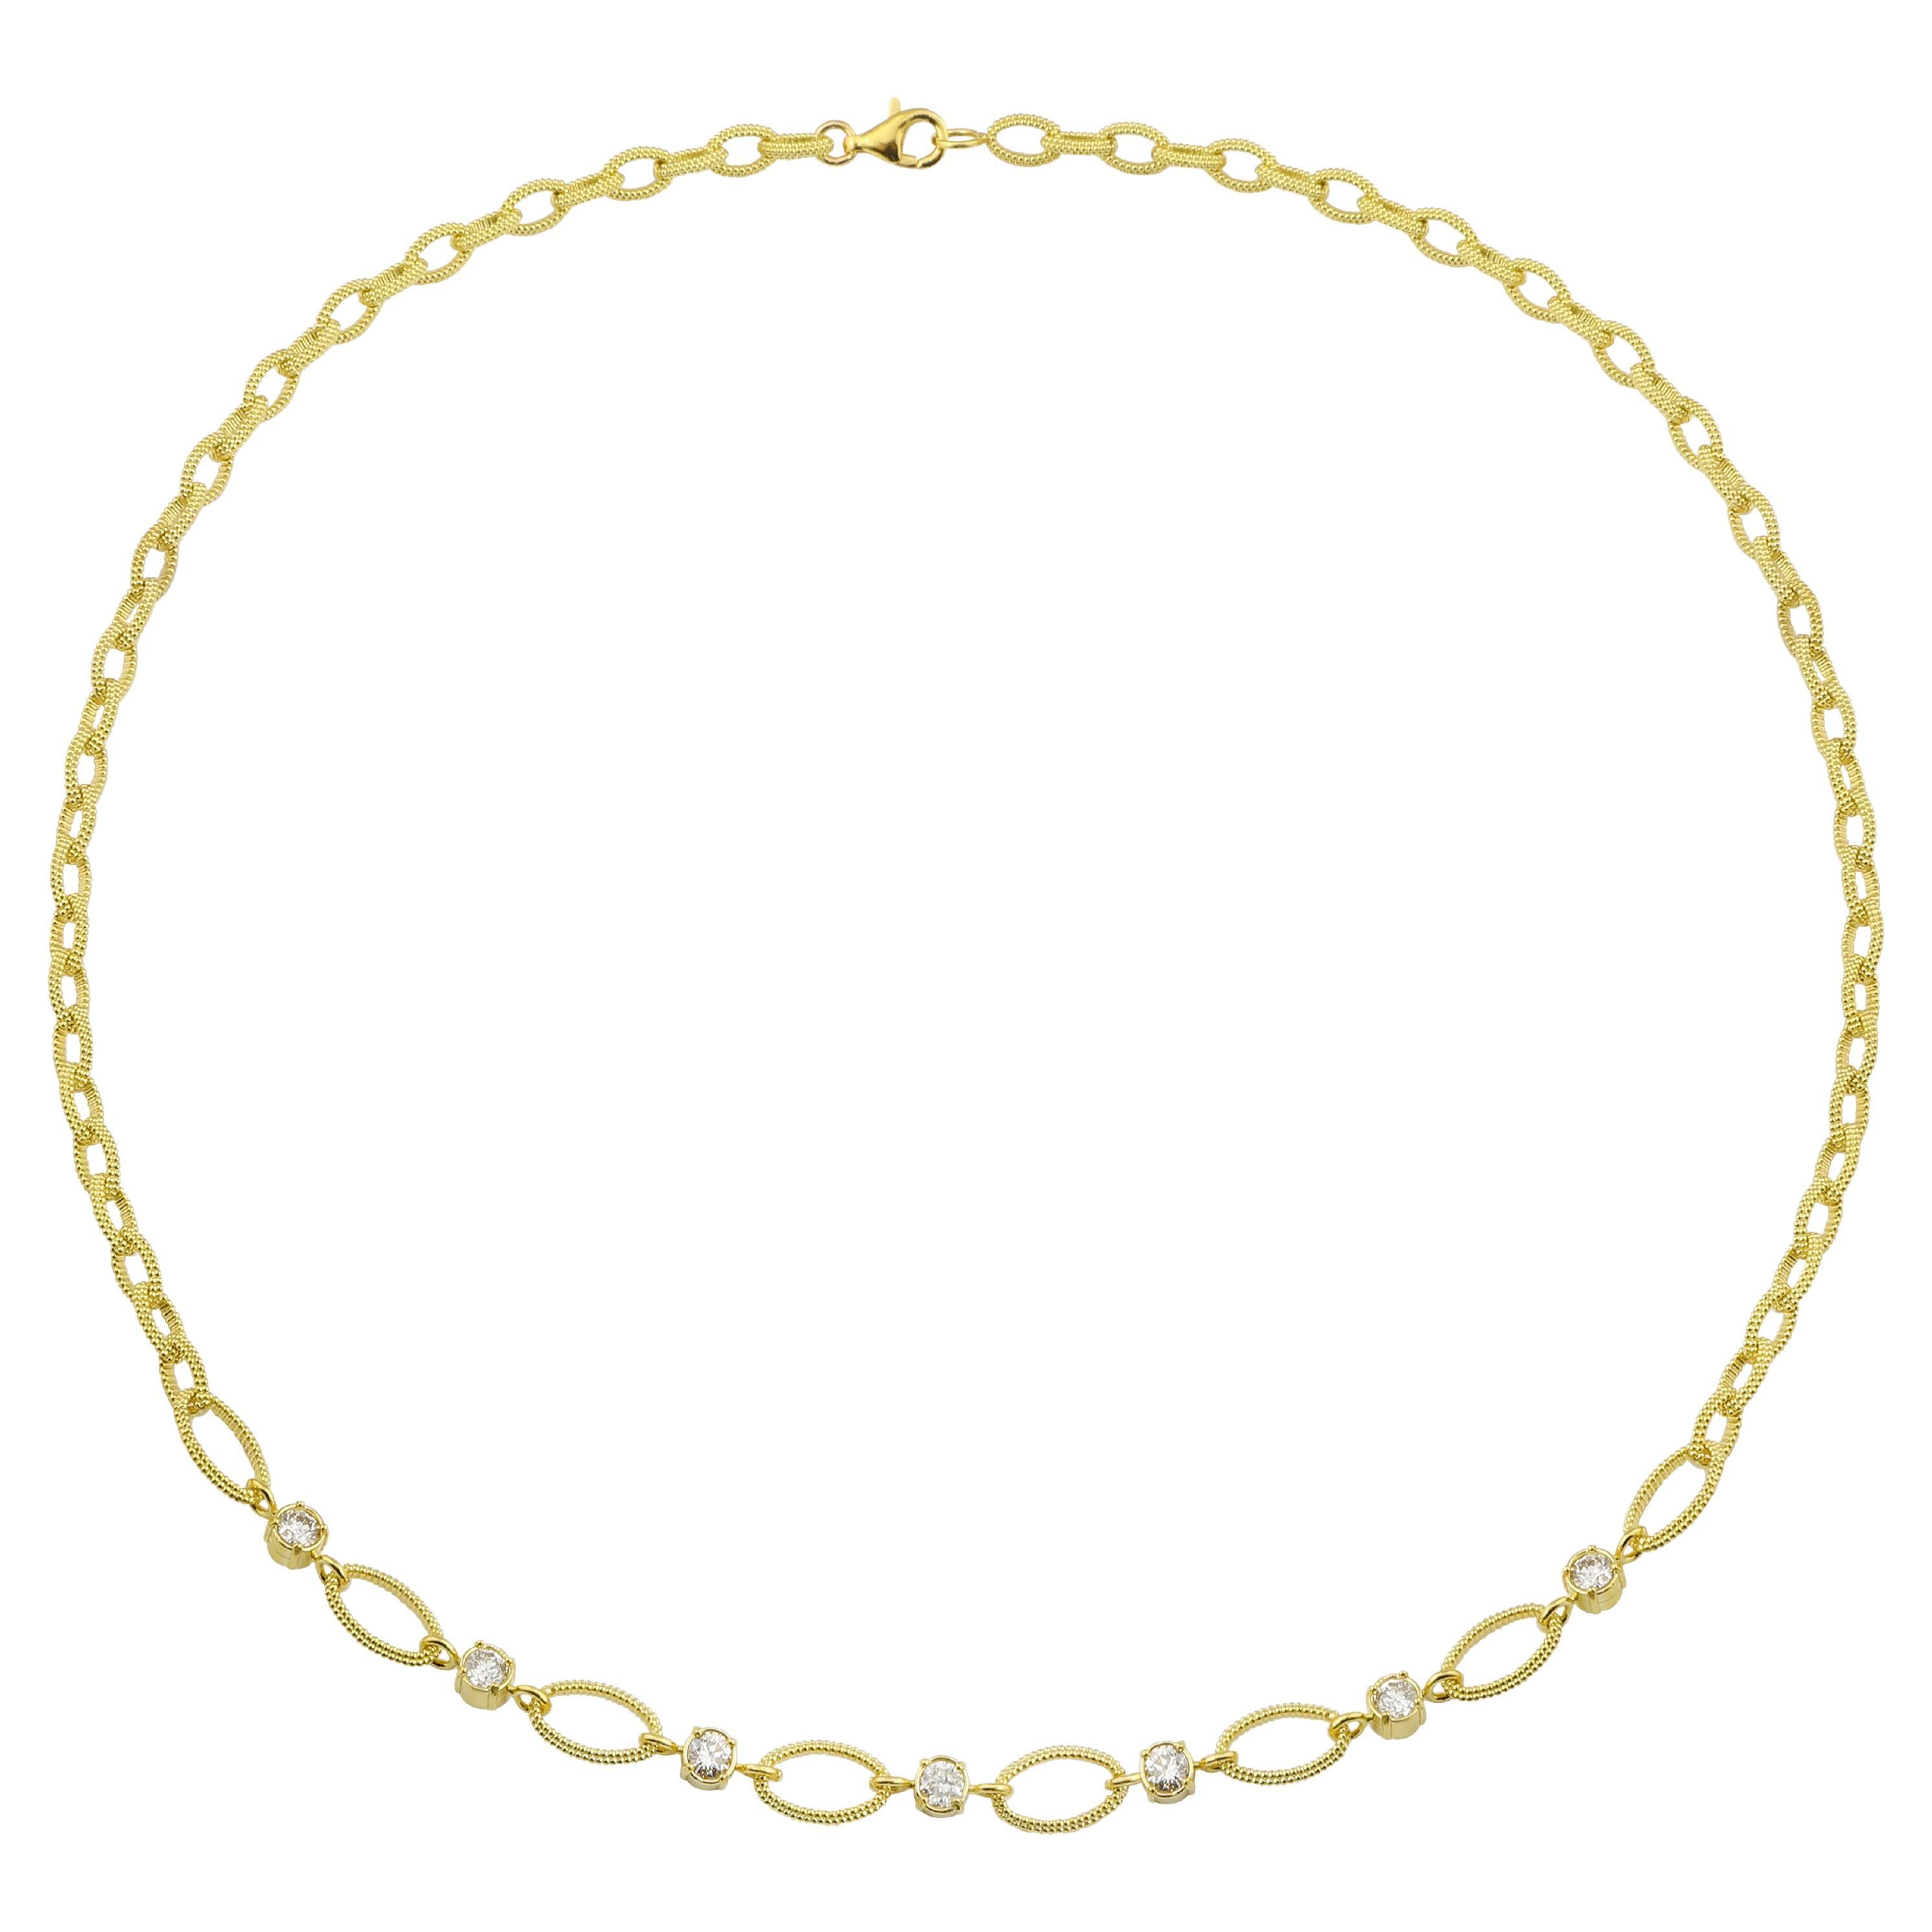 Amyn, Etruscan Oval Granulated Link Necklace with Diamonds in 18k Gold For Sale